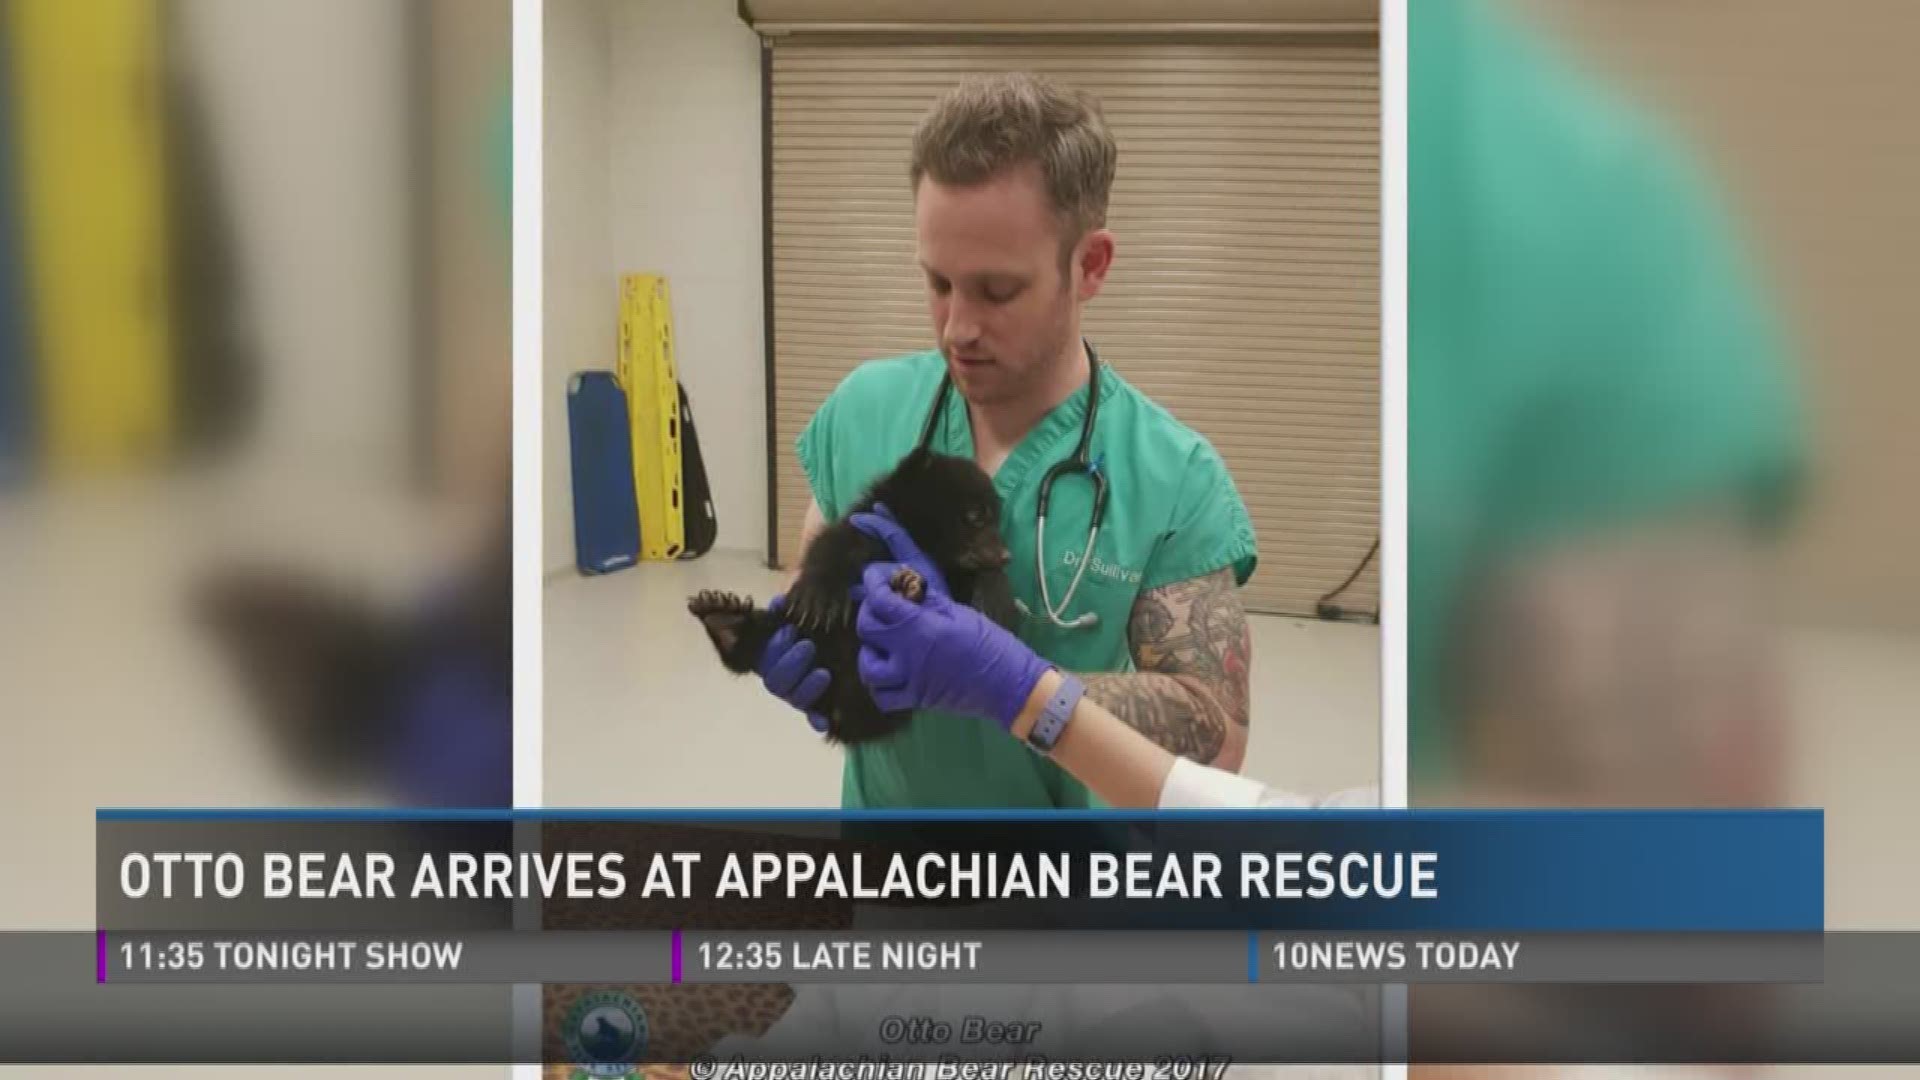 April 11, 2017: A new bear is now living at Appalachian Bear Rescue.